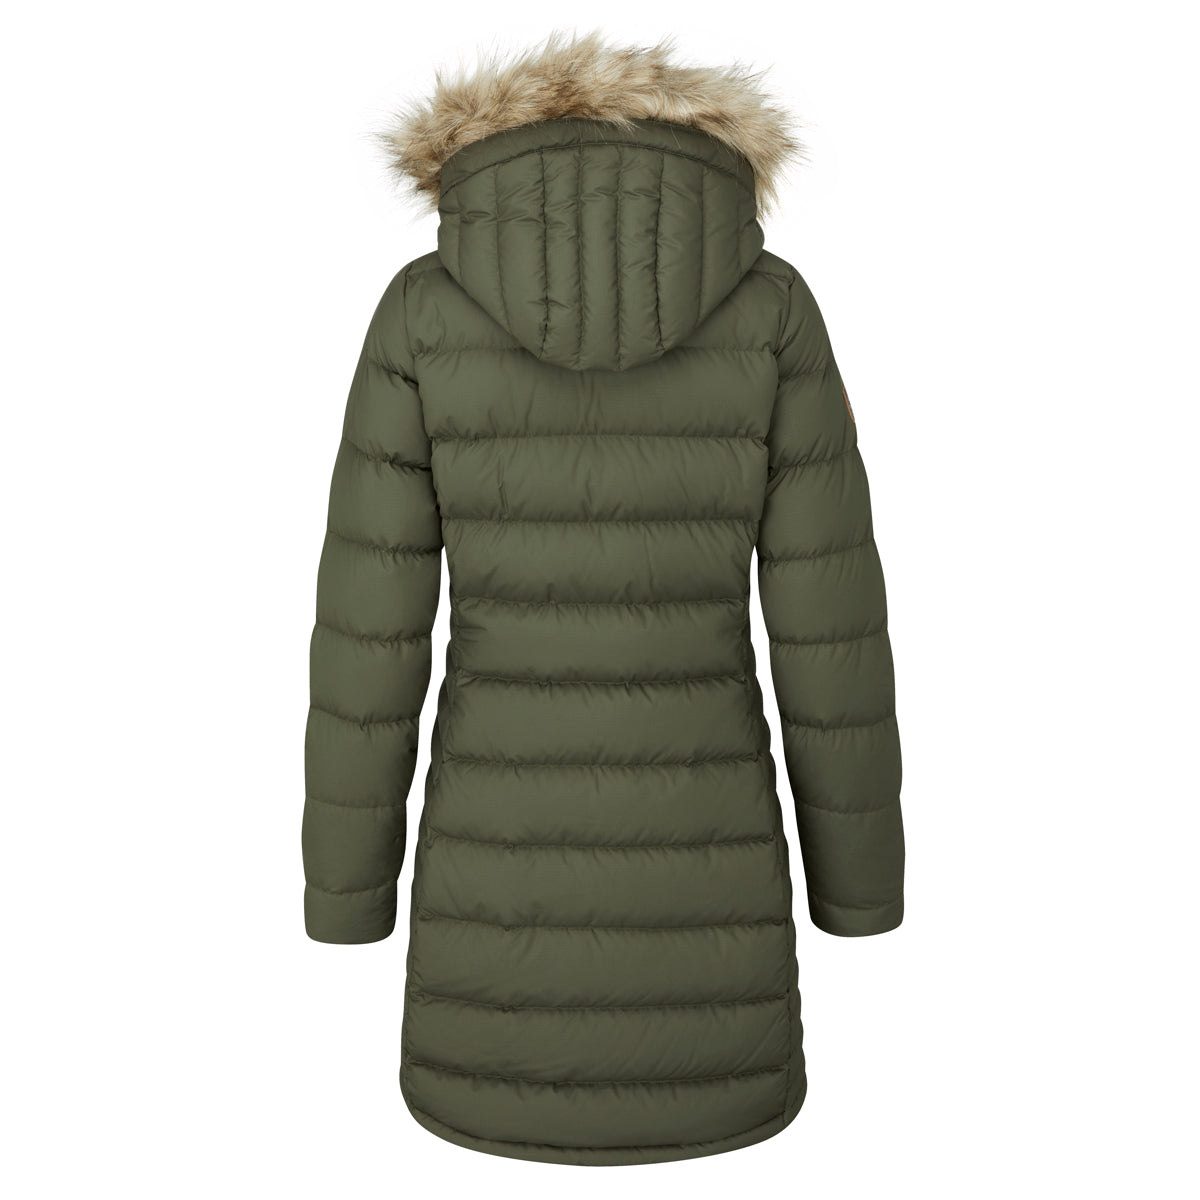 Rab Deep Cover Parka Insulated Women's Jacket | Army